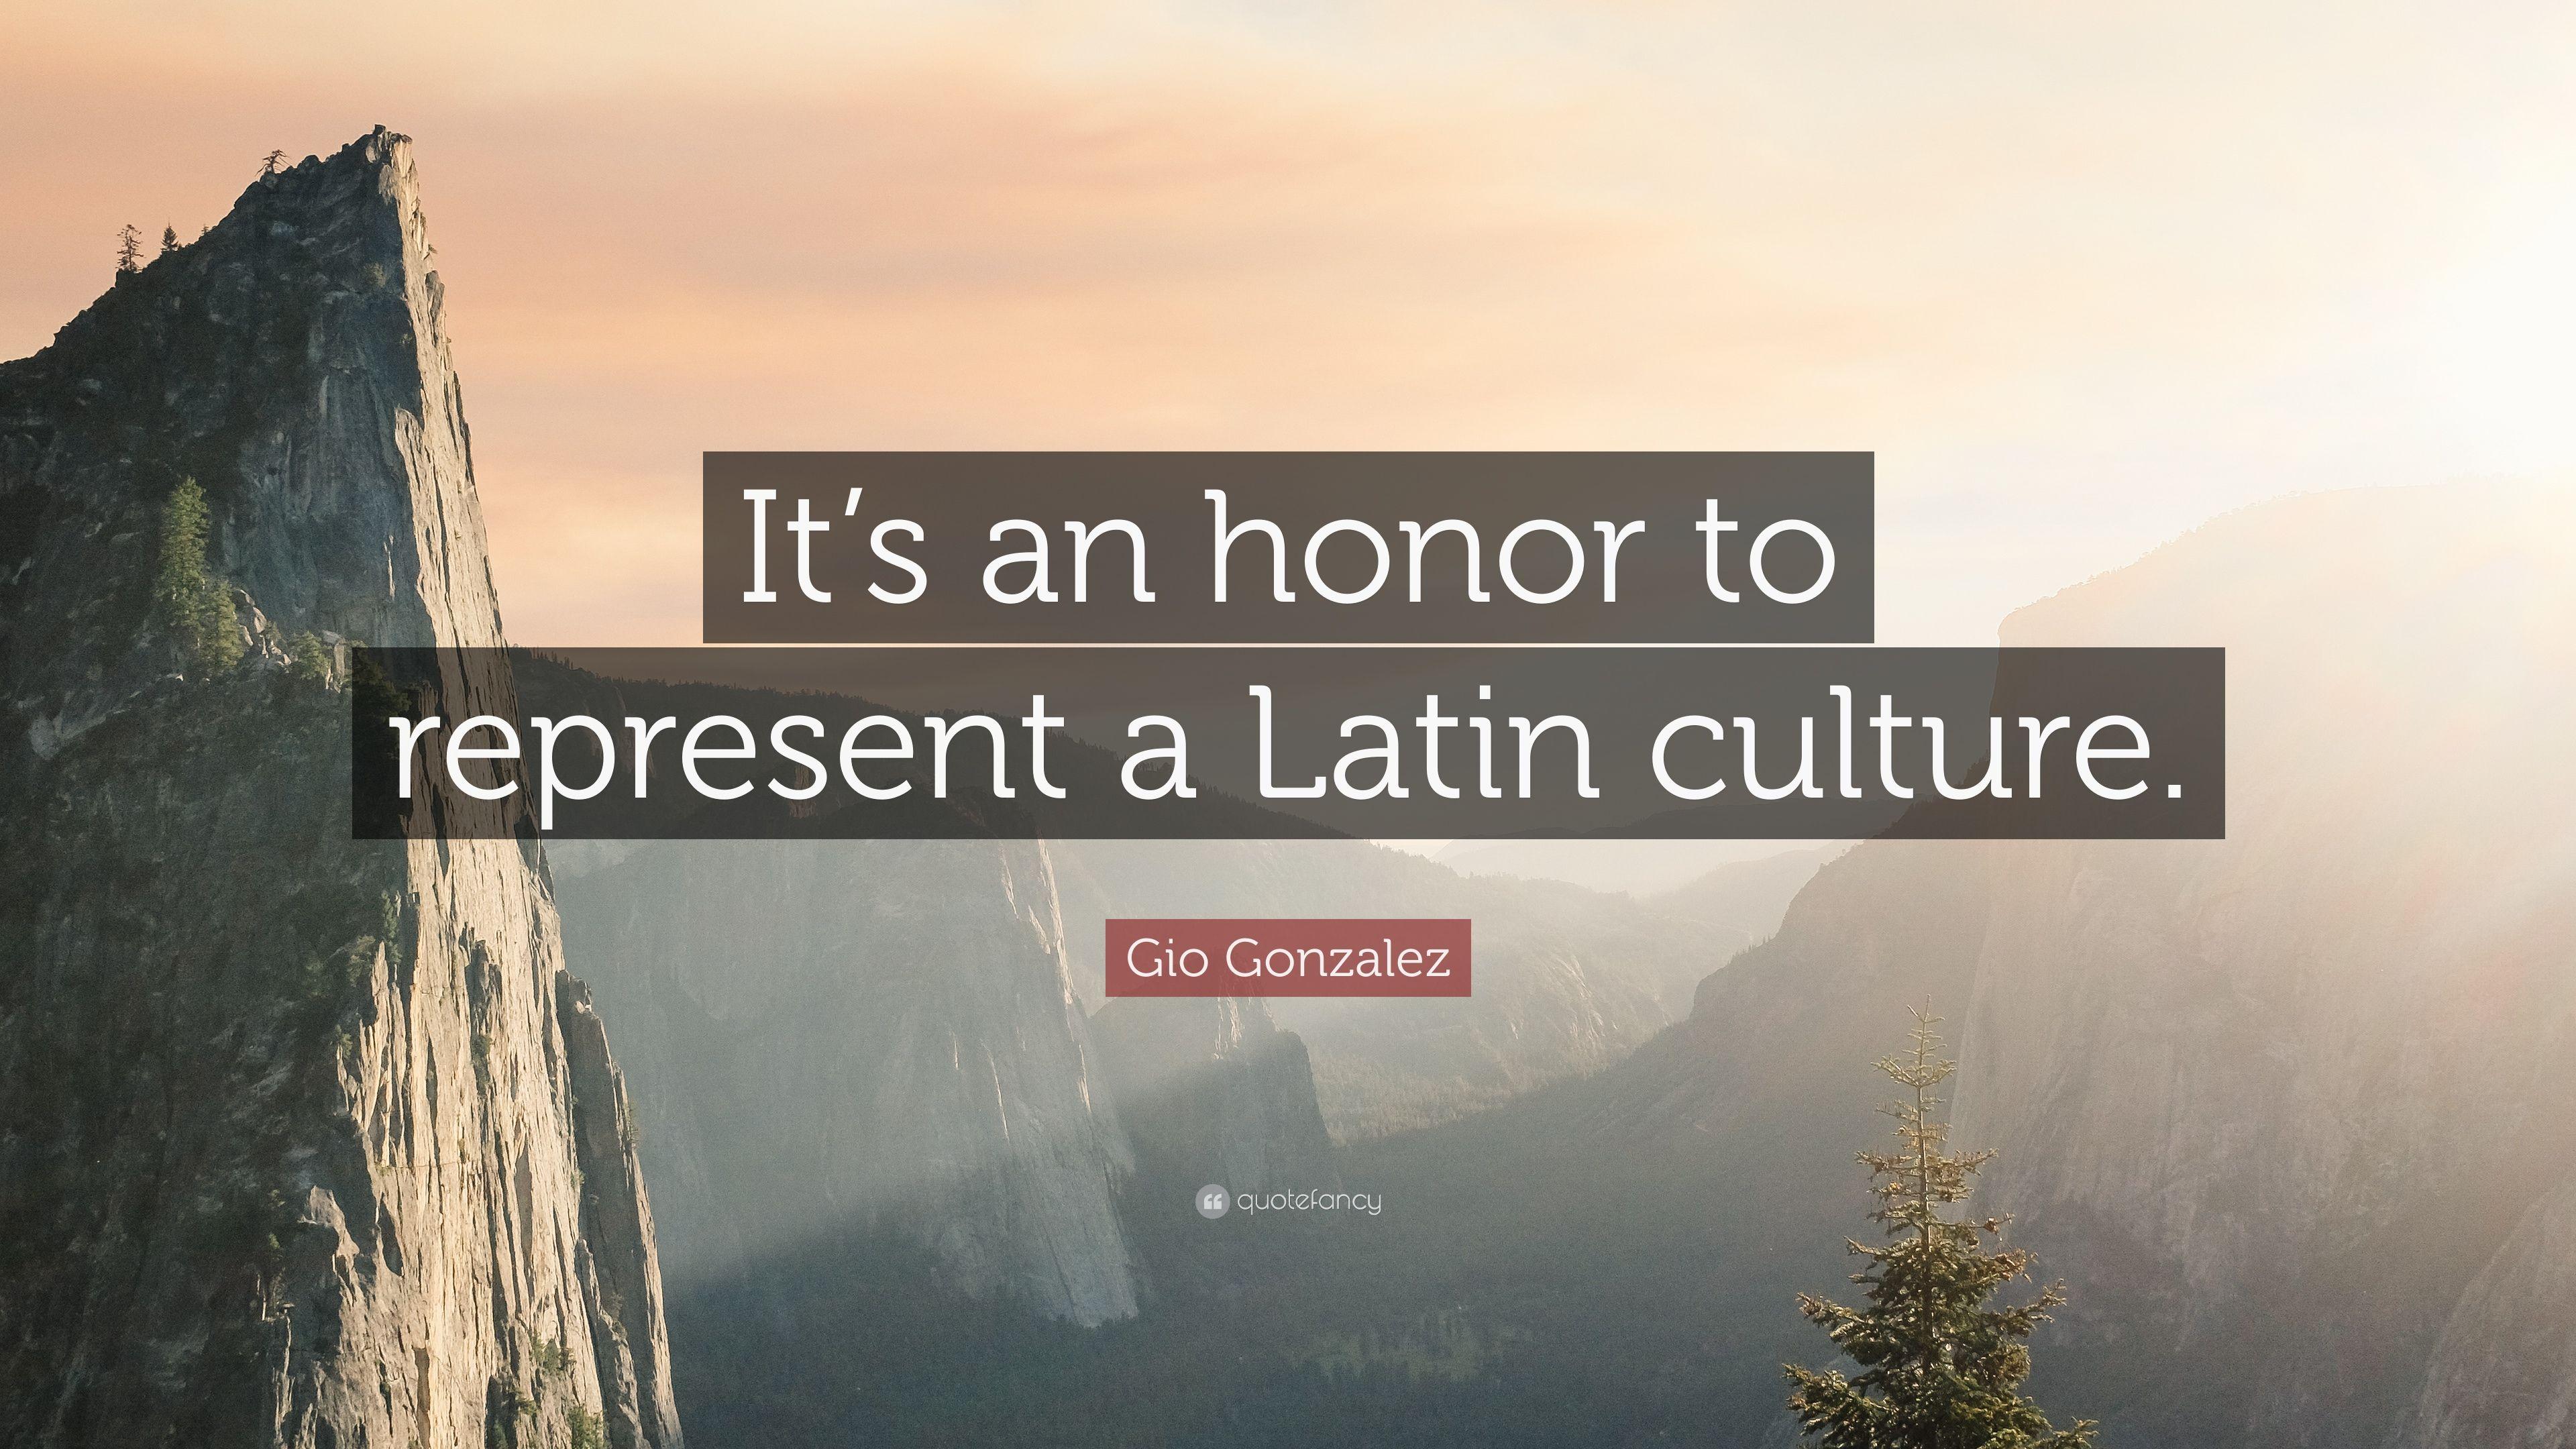 Gio Gonzalez Quote: “It's an honor to represent a Latin culture